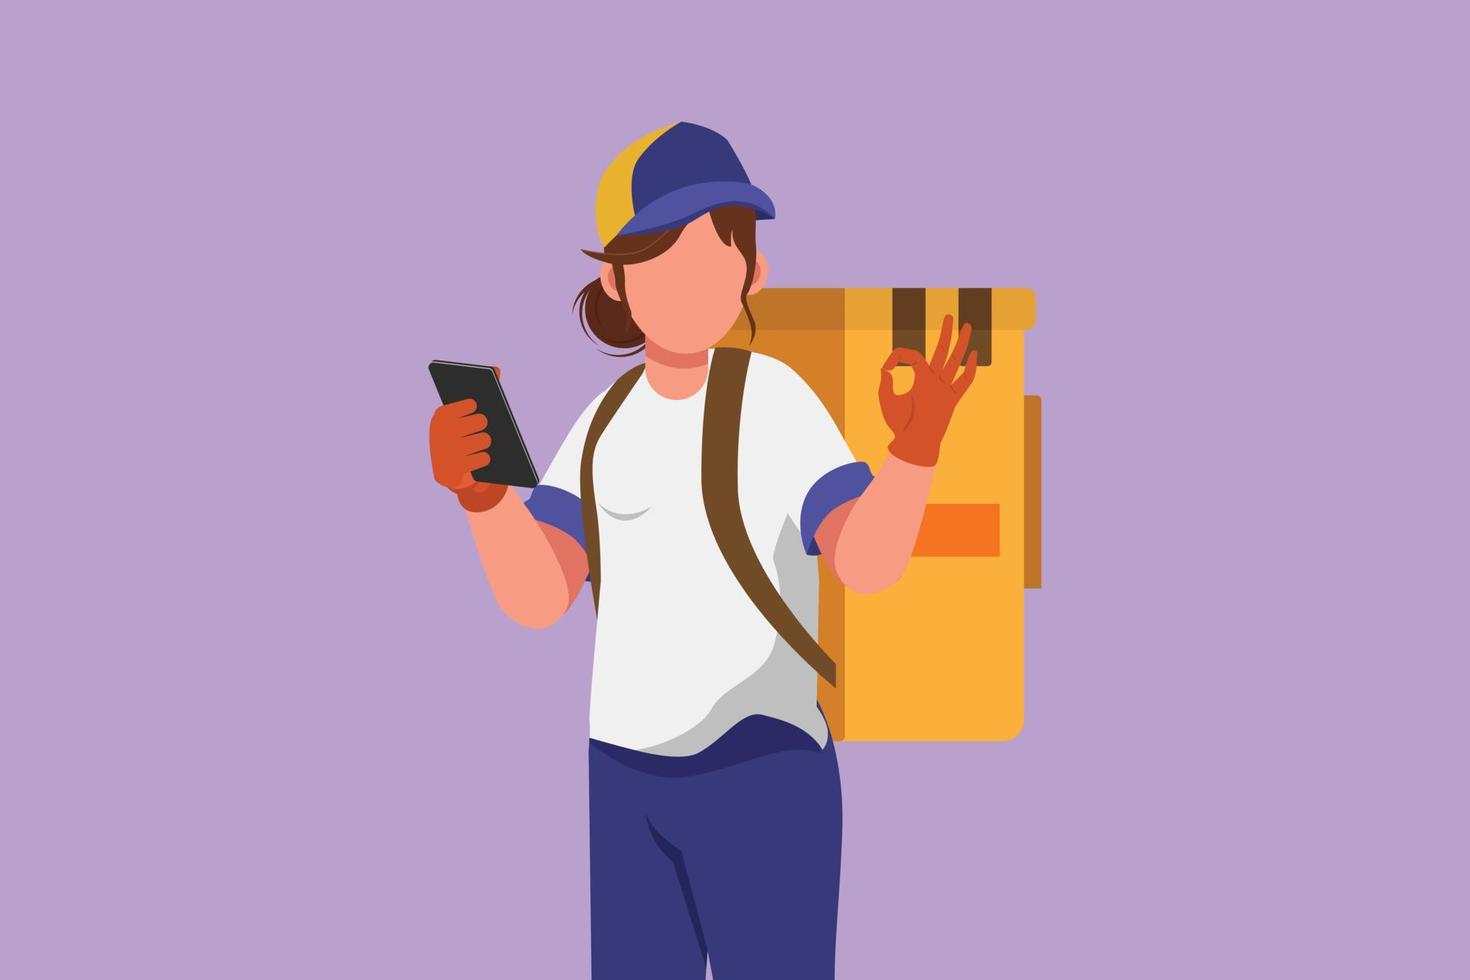 Cartoon flat style drawing deliverywoman holding smartphone for finding address with okay gesture, carry package box to be delivered to customer with best service. Graphic design vector illustration